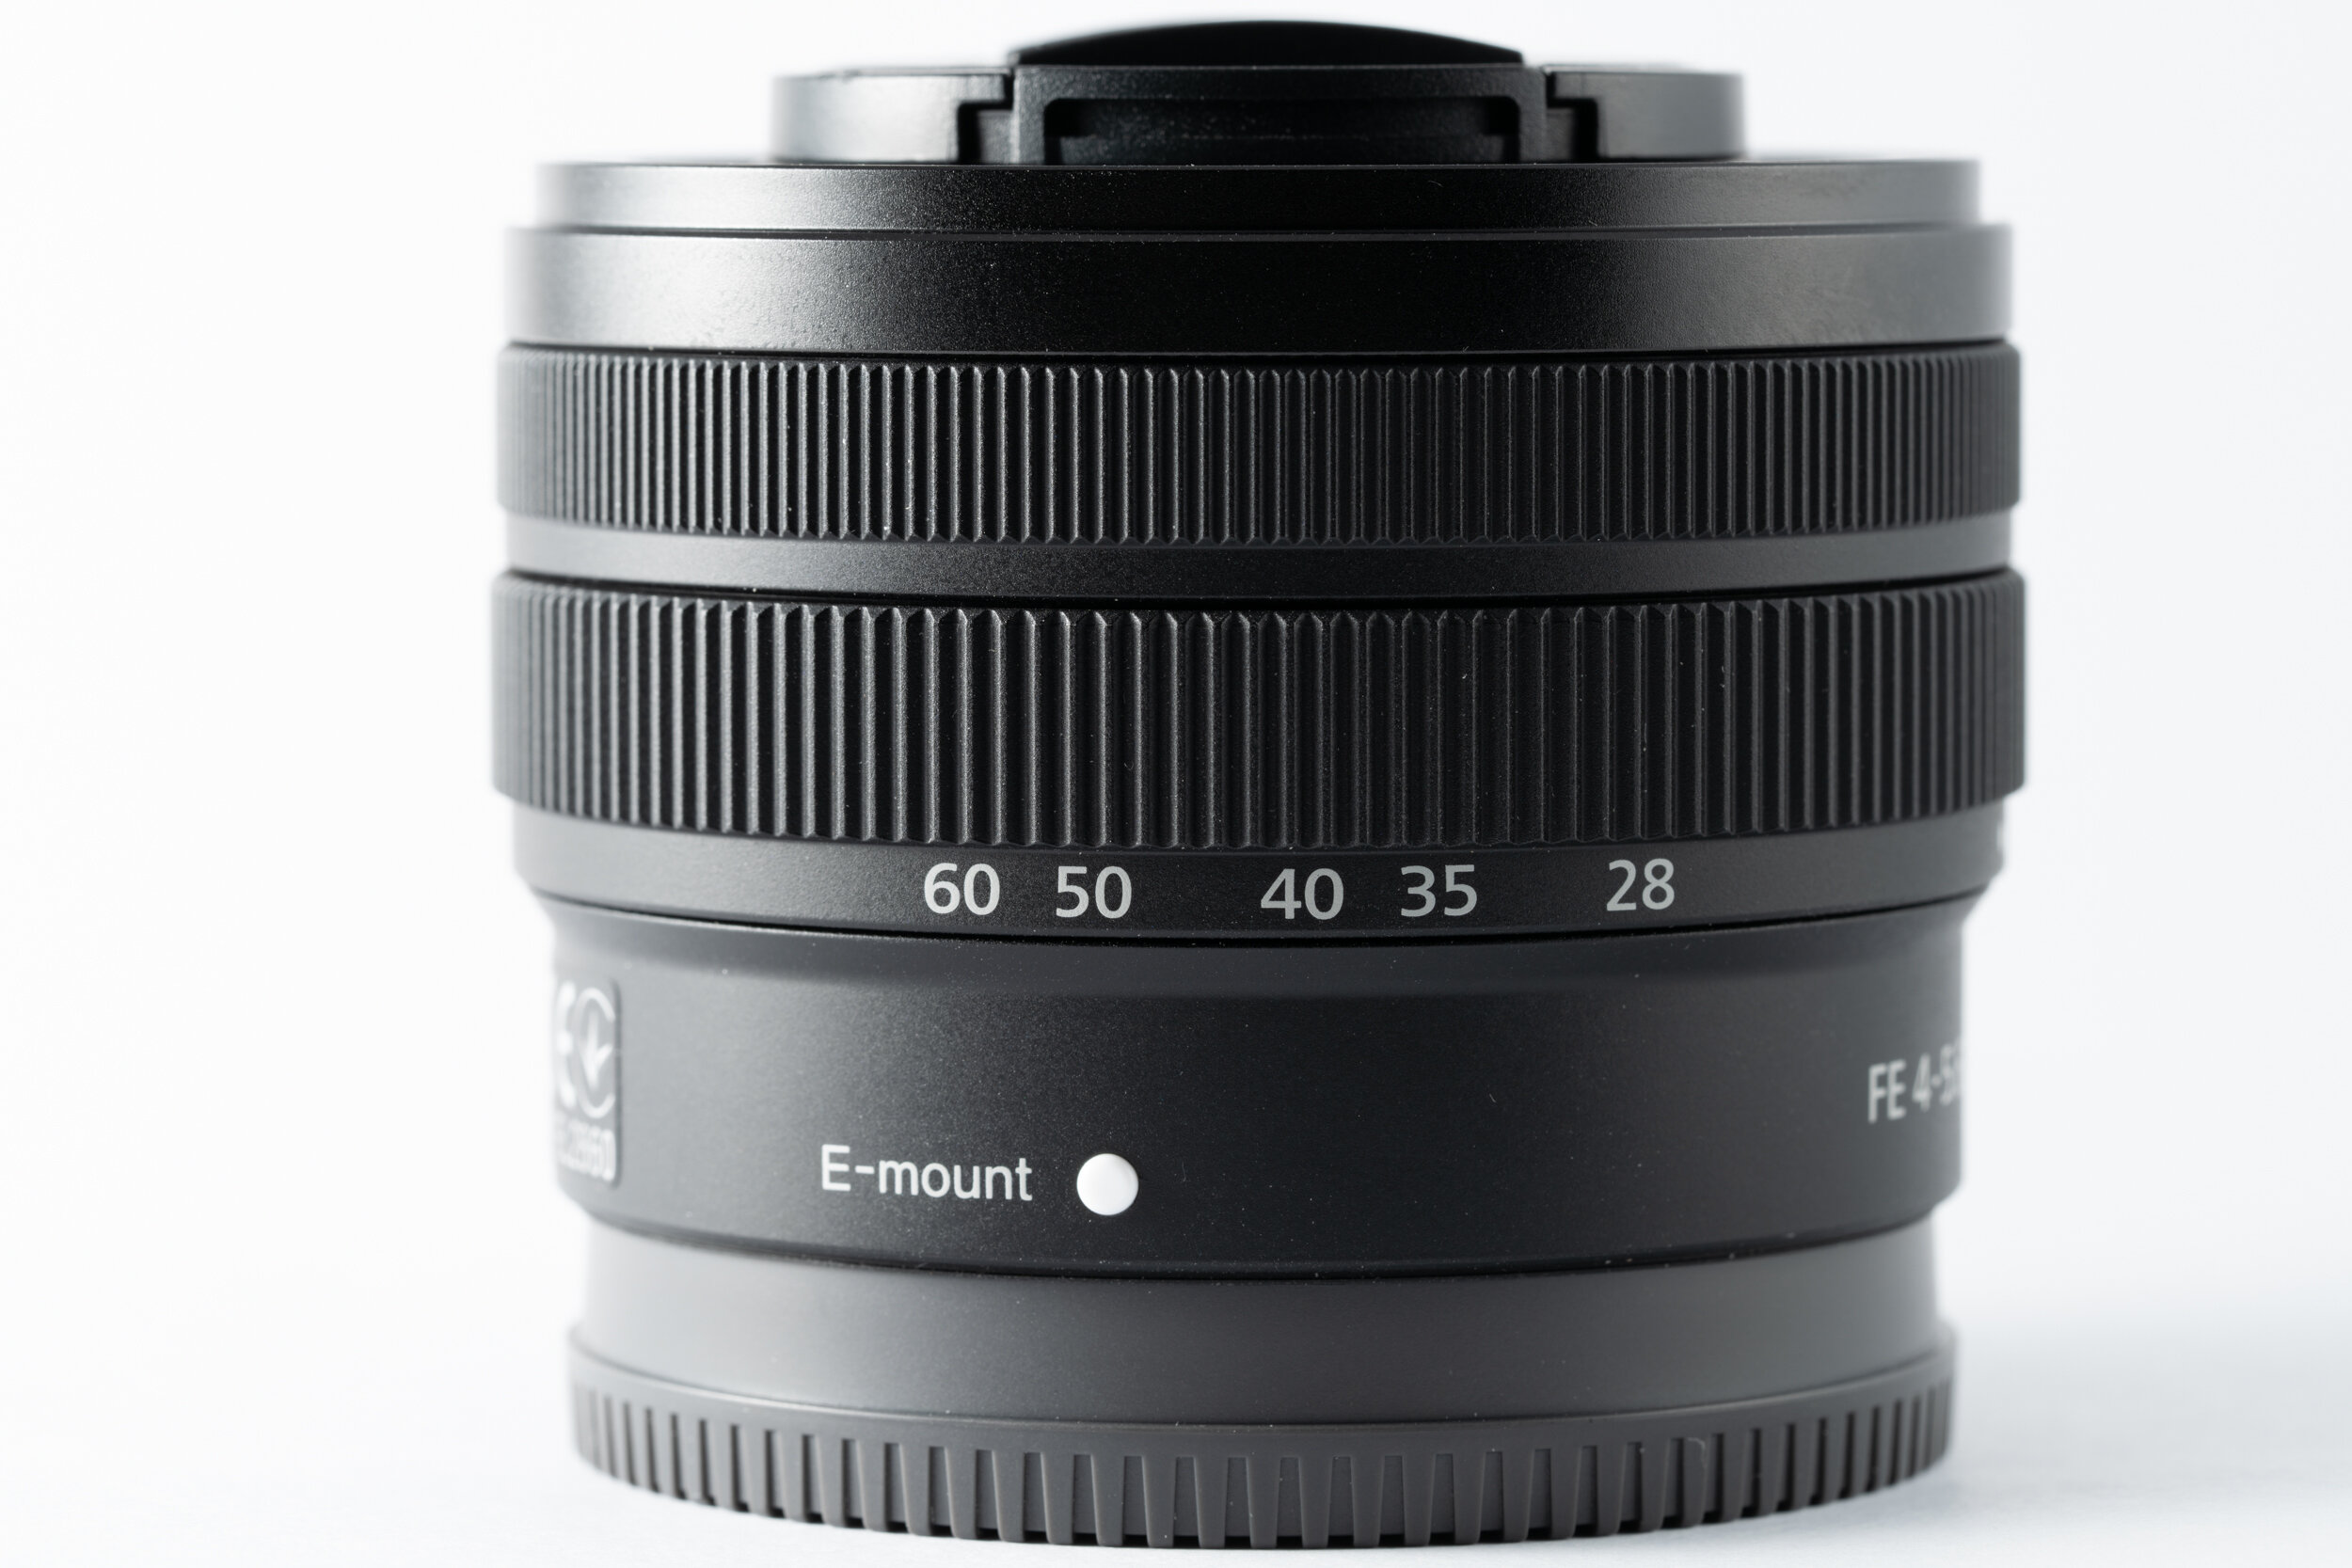 Sony FE 28-60mm F4-5.6 Review — Frank Lau Photography